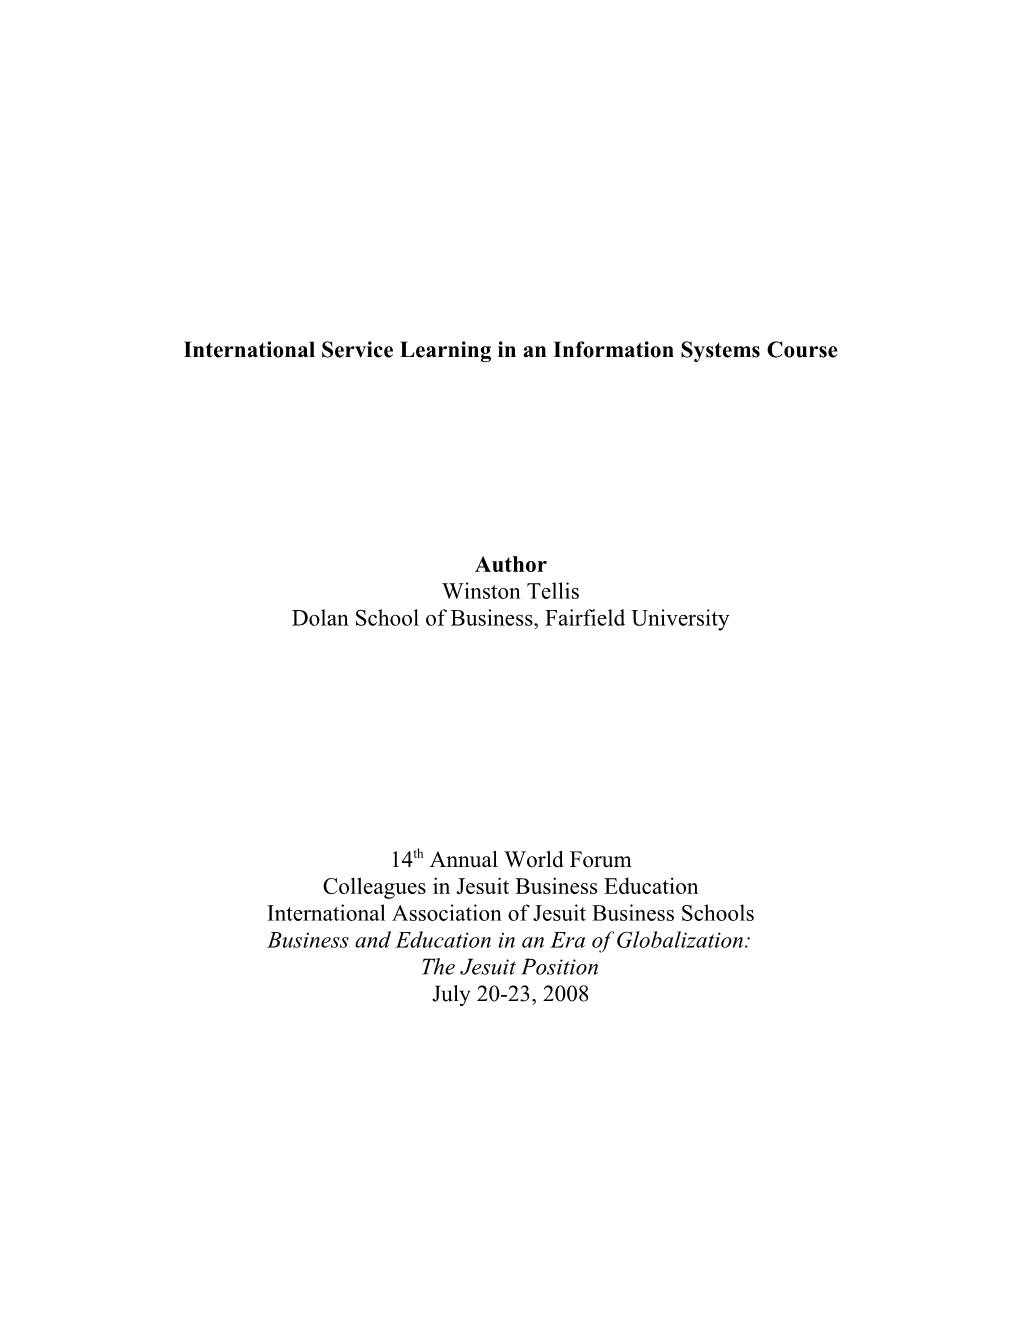 International Service Learning in an Information Systems Course